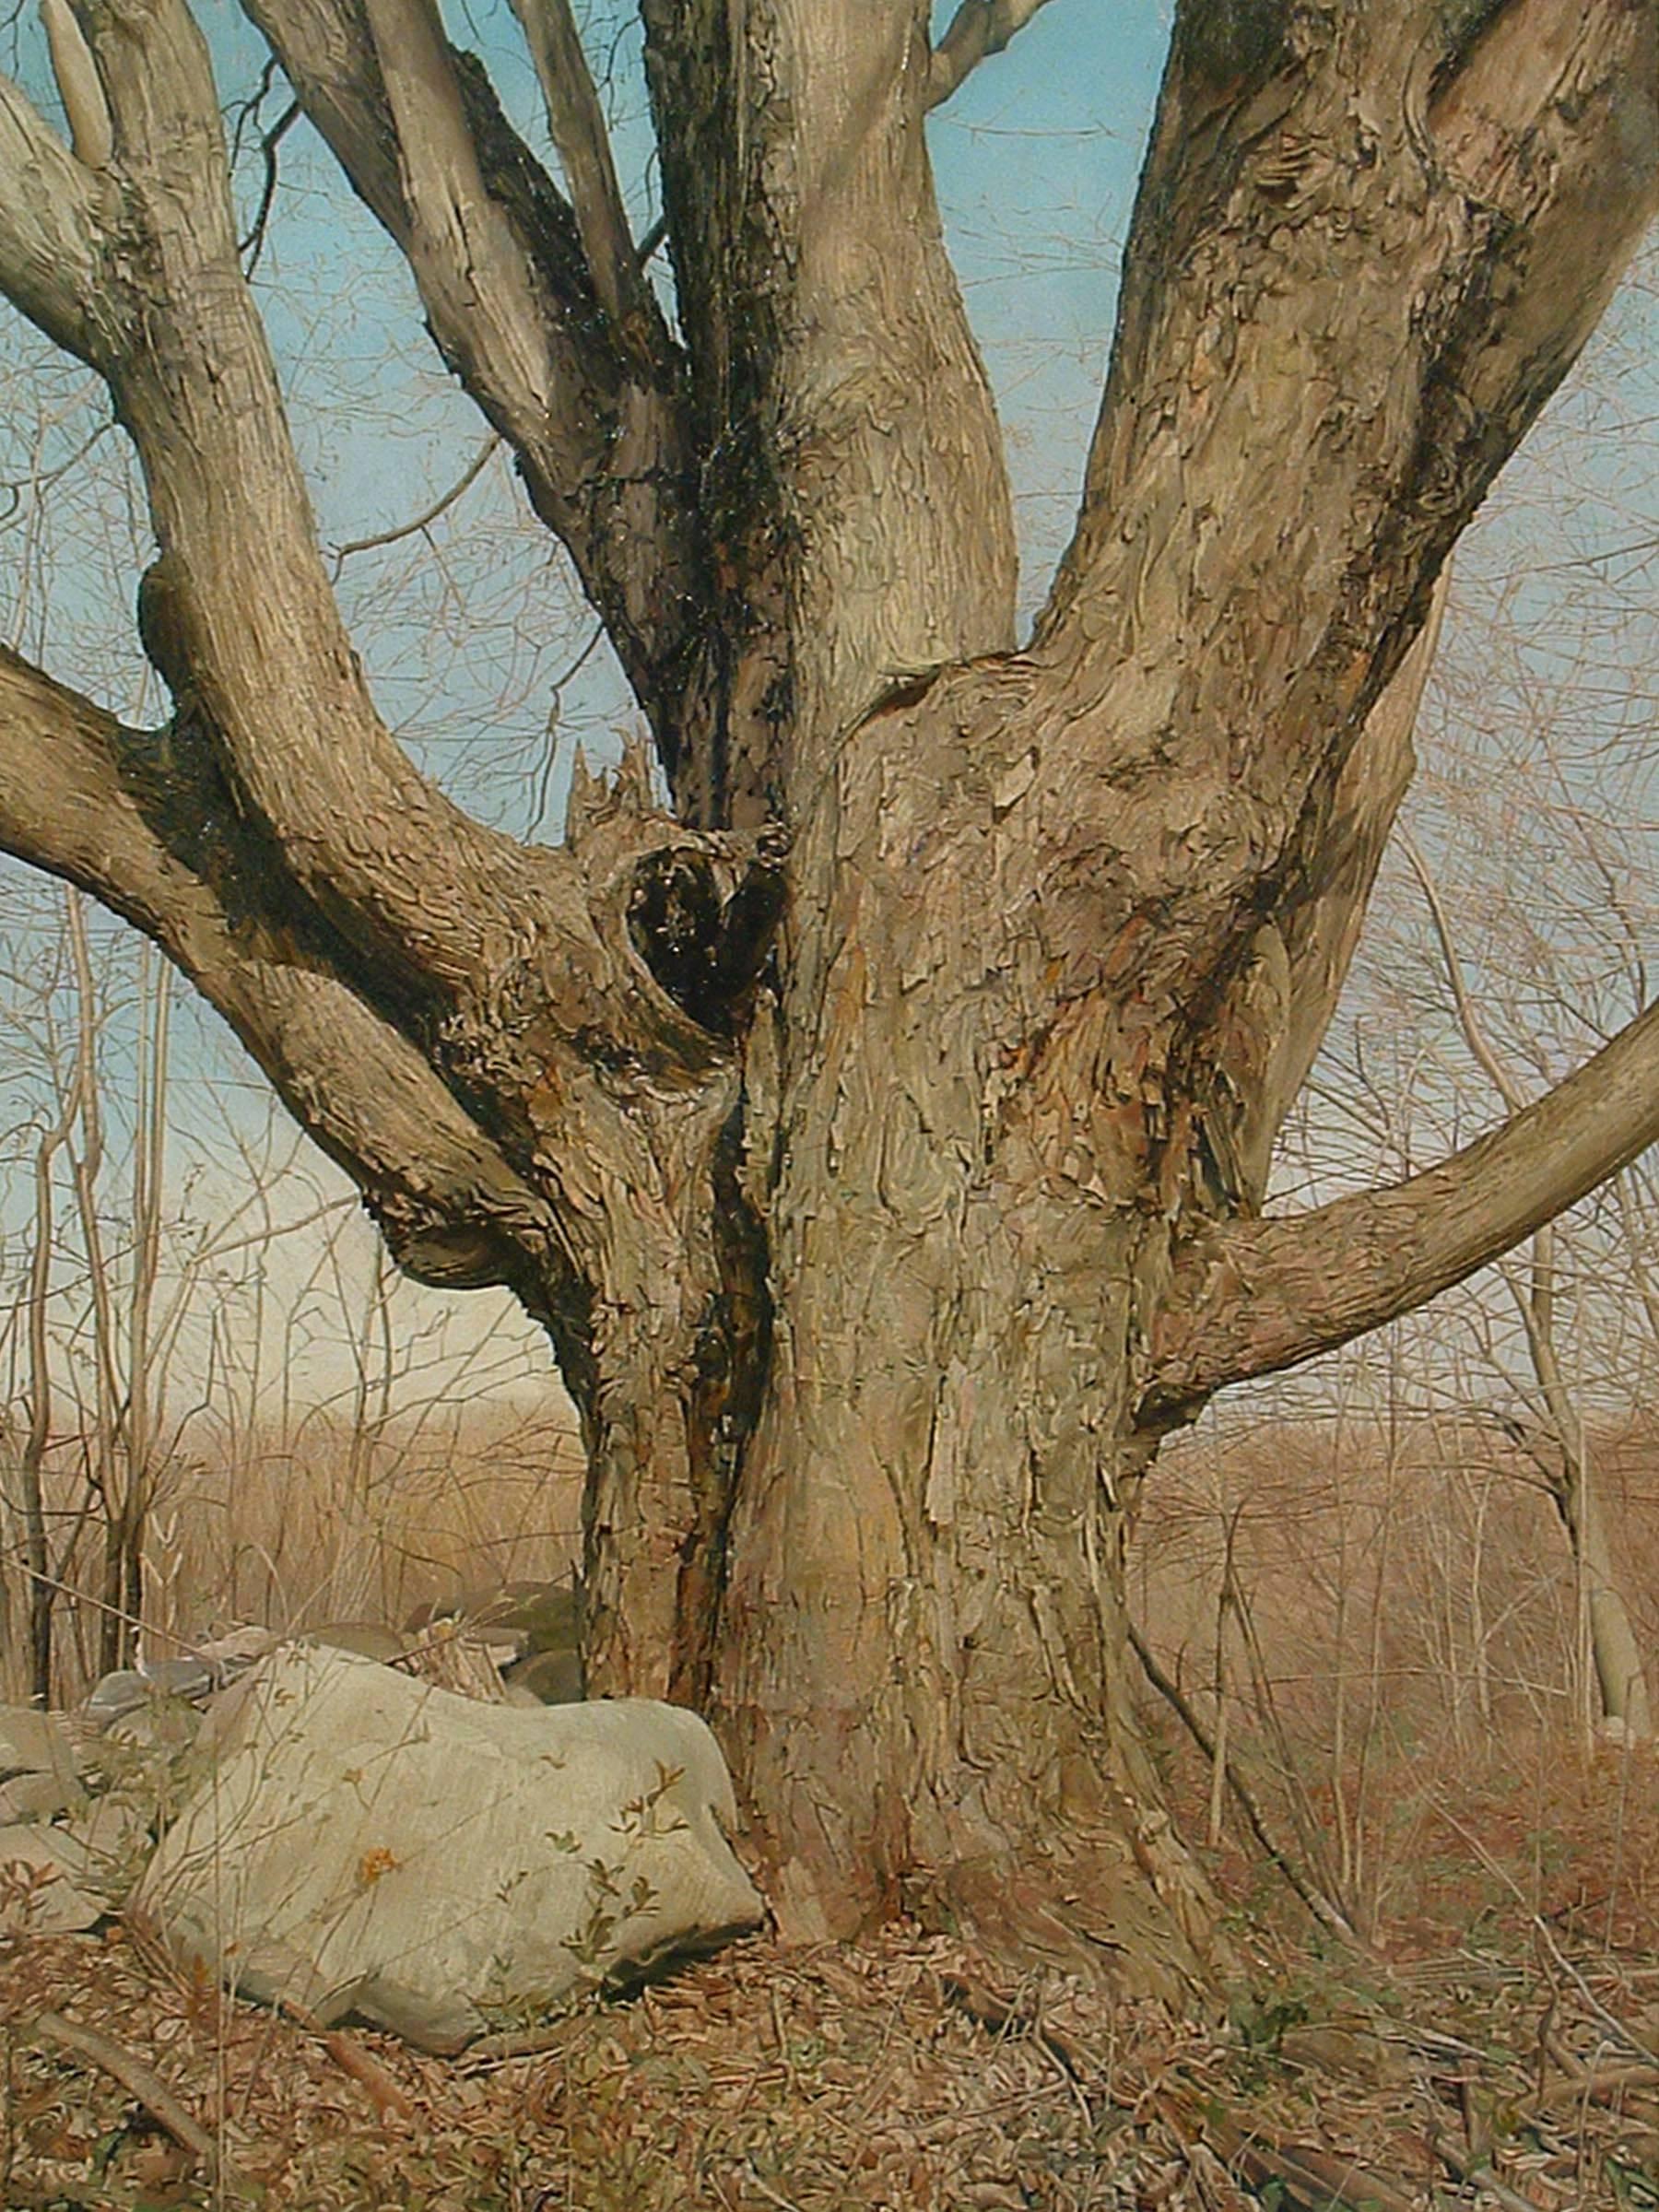 Trey Friedman Landscape Painting - TREES ON A LINE #1, tree in the forest, old tree, photo-realism, wood, bark